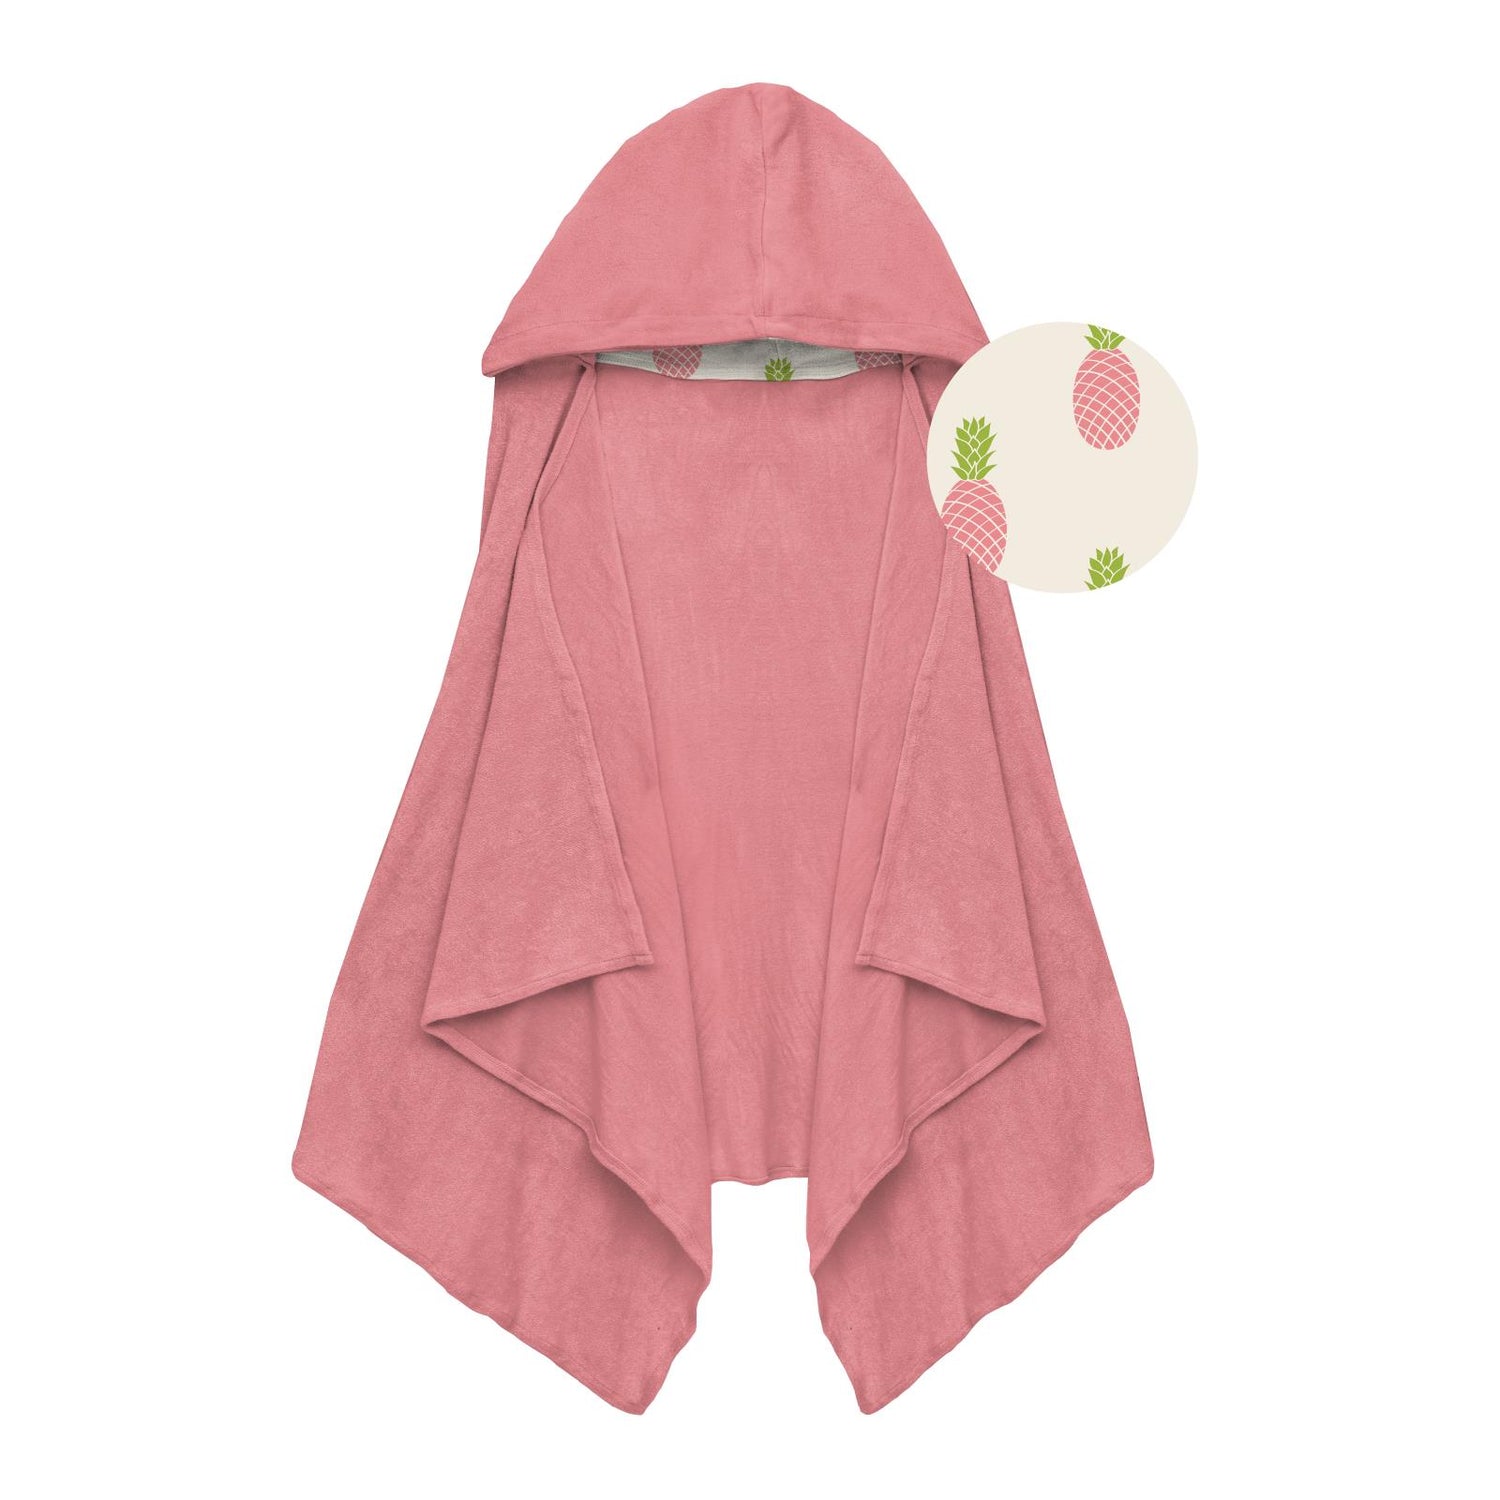 Terry Hooded Towel with Lined Hood in Strawberry with Natural Pineapples